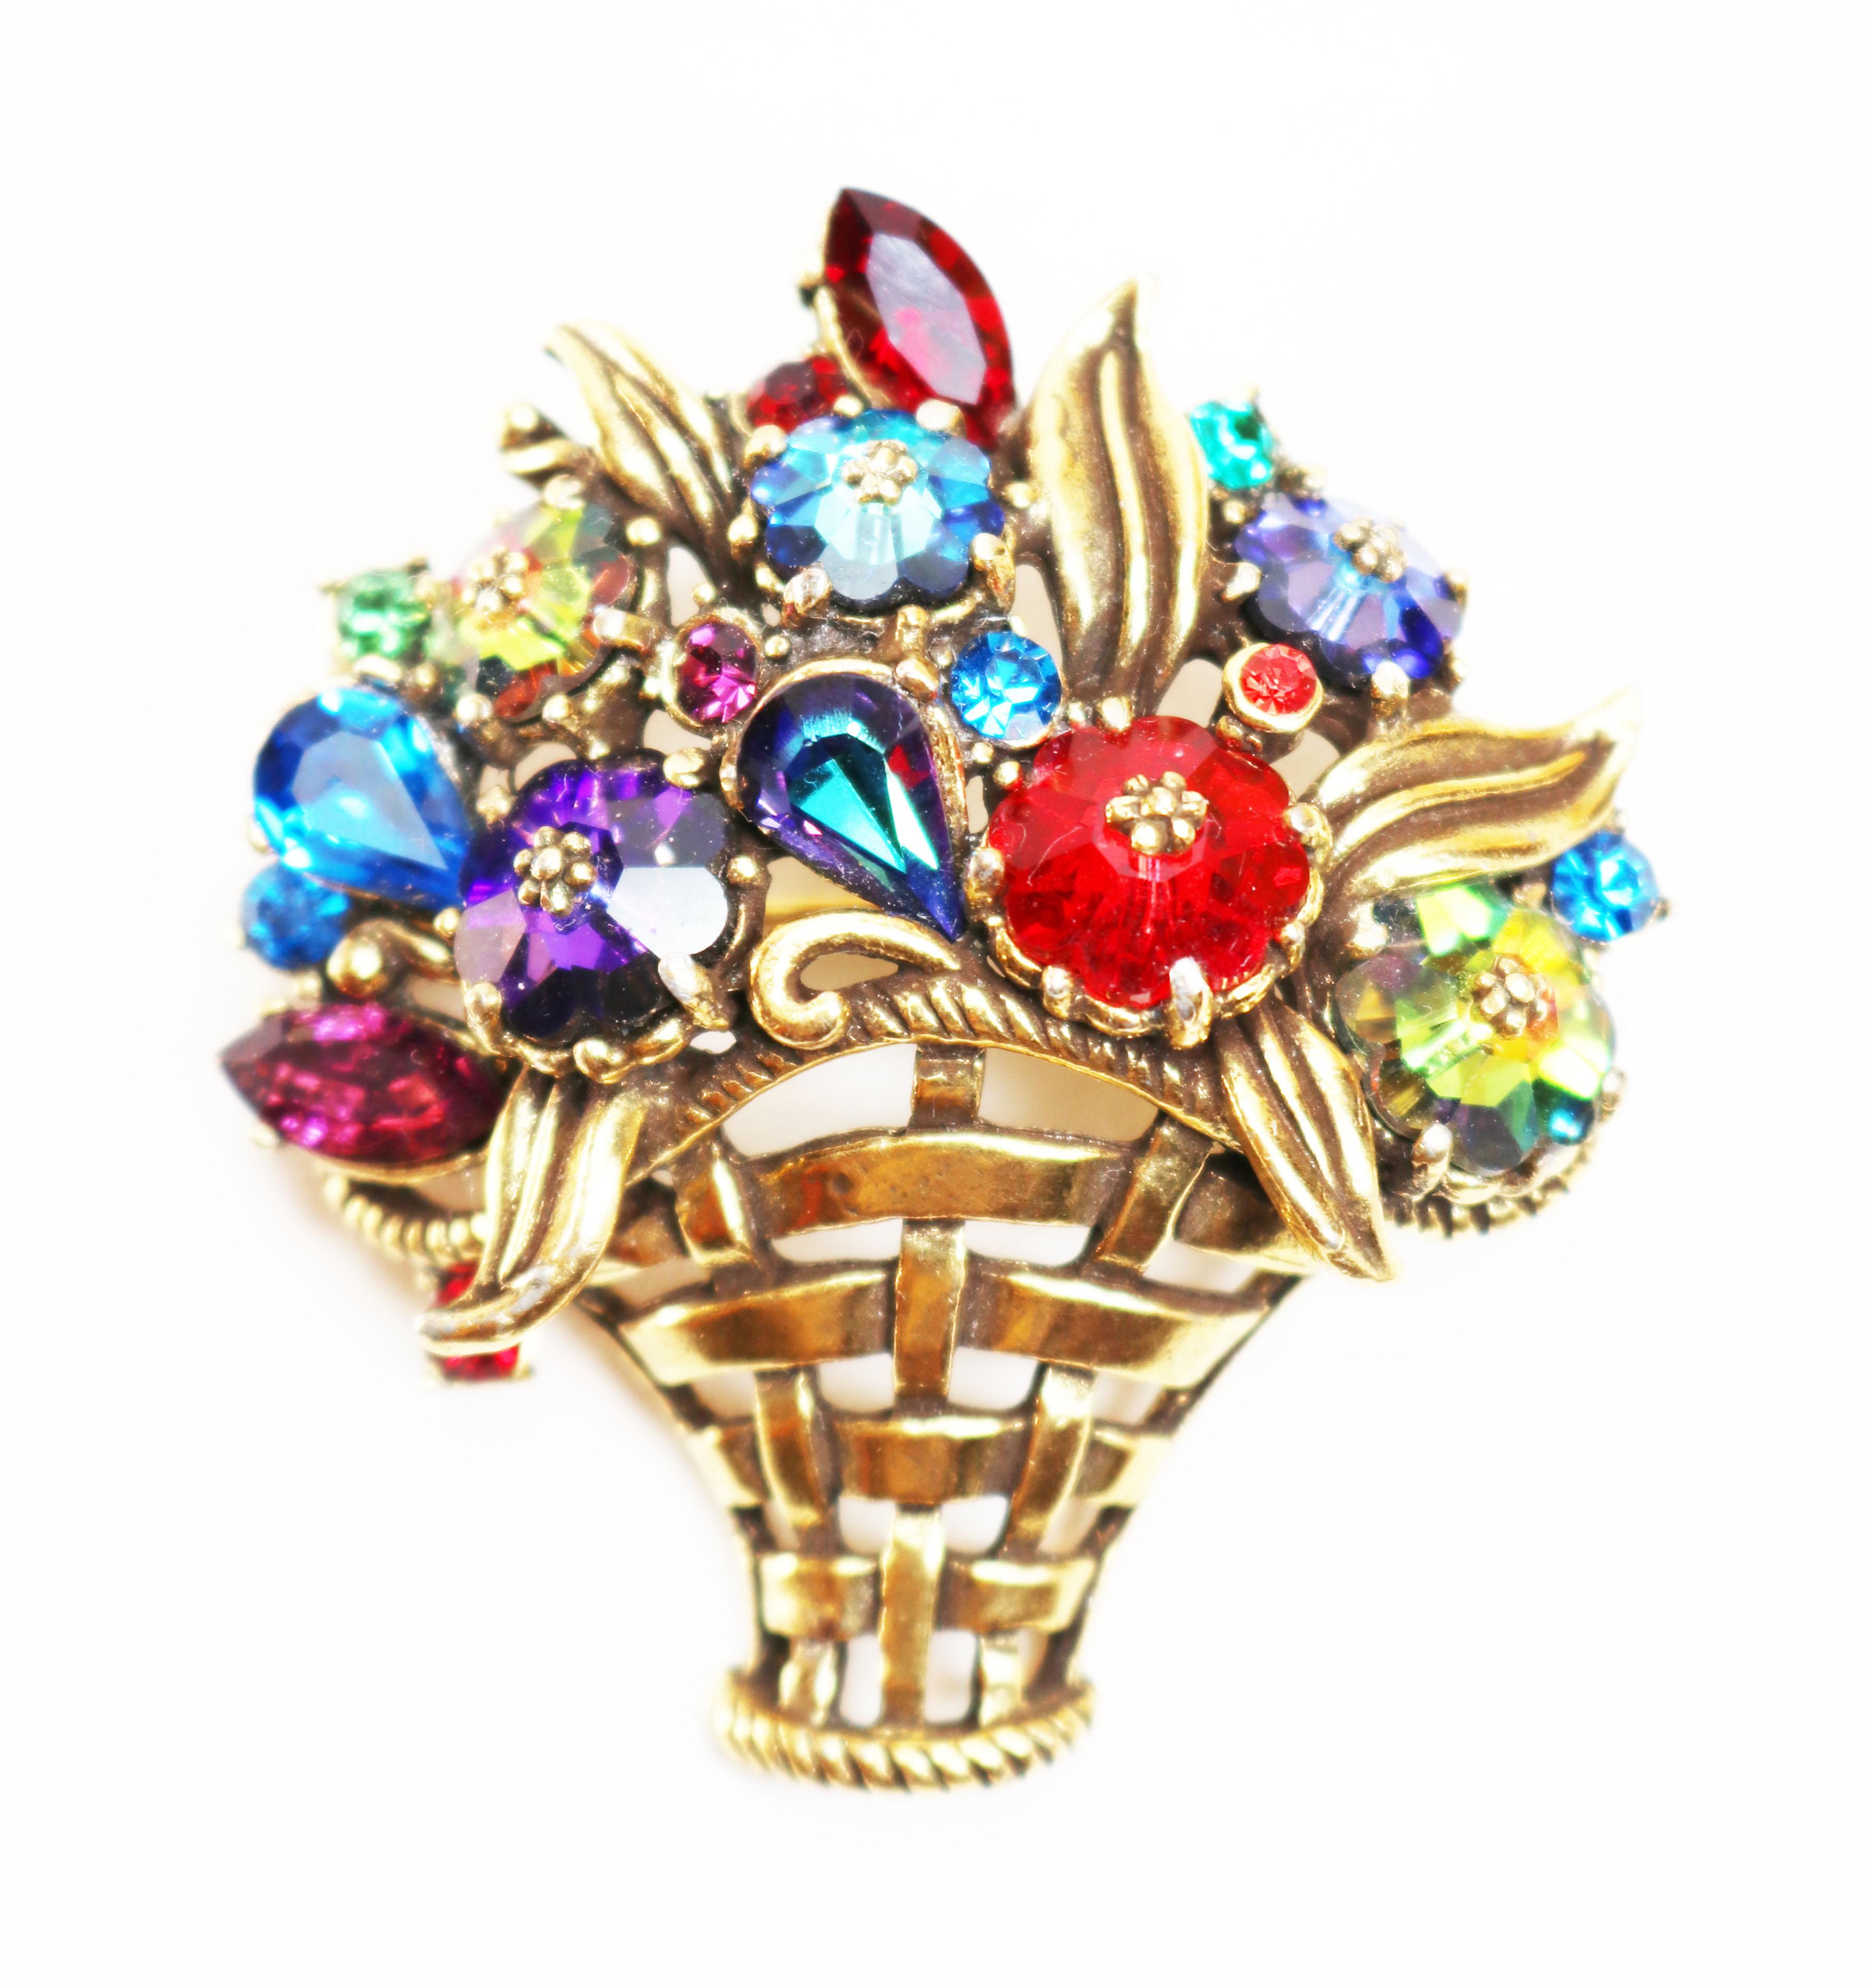 This 1950s WEISS *signed* Jeweled Basket Brooch really dazzles with a spectacular floral bouquet of brightly colored crystals dancing in the light, sparkling and shining. There are gorgeous crystals in deep ruby red, aurora borealis treated green